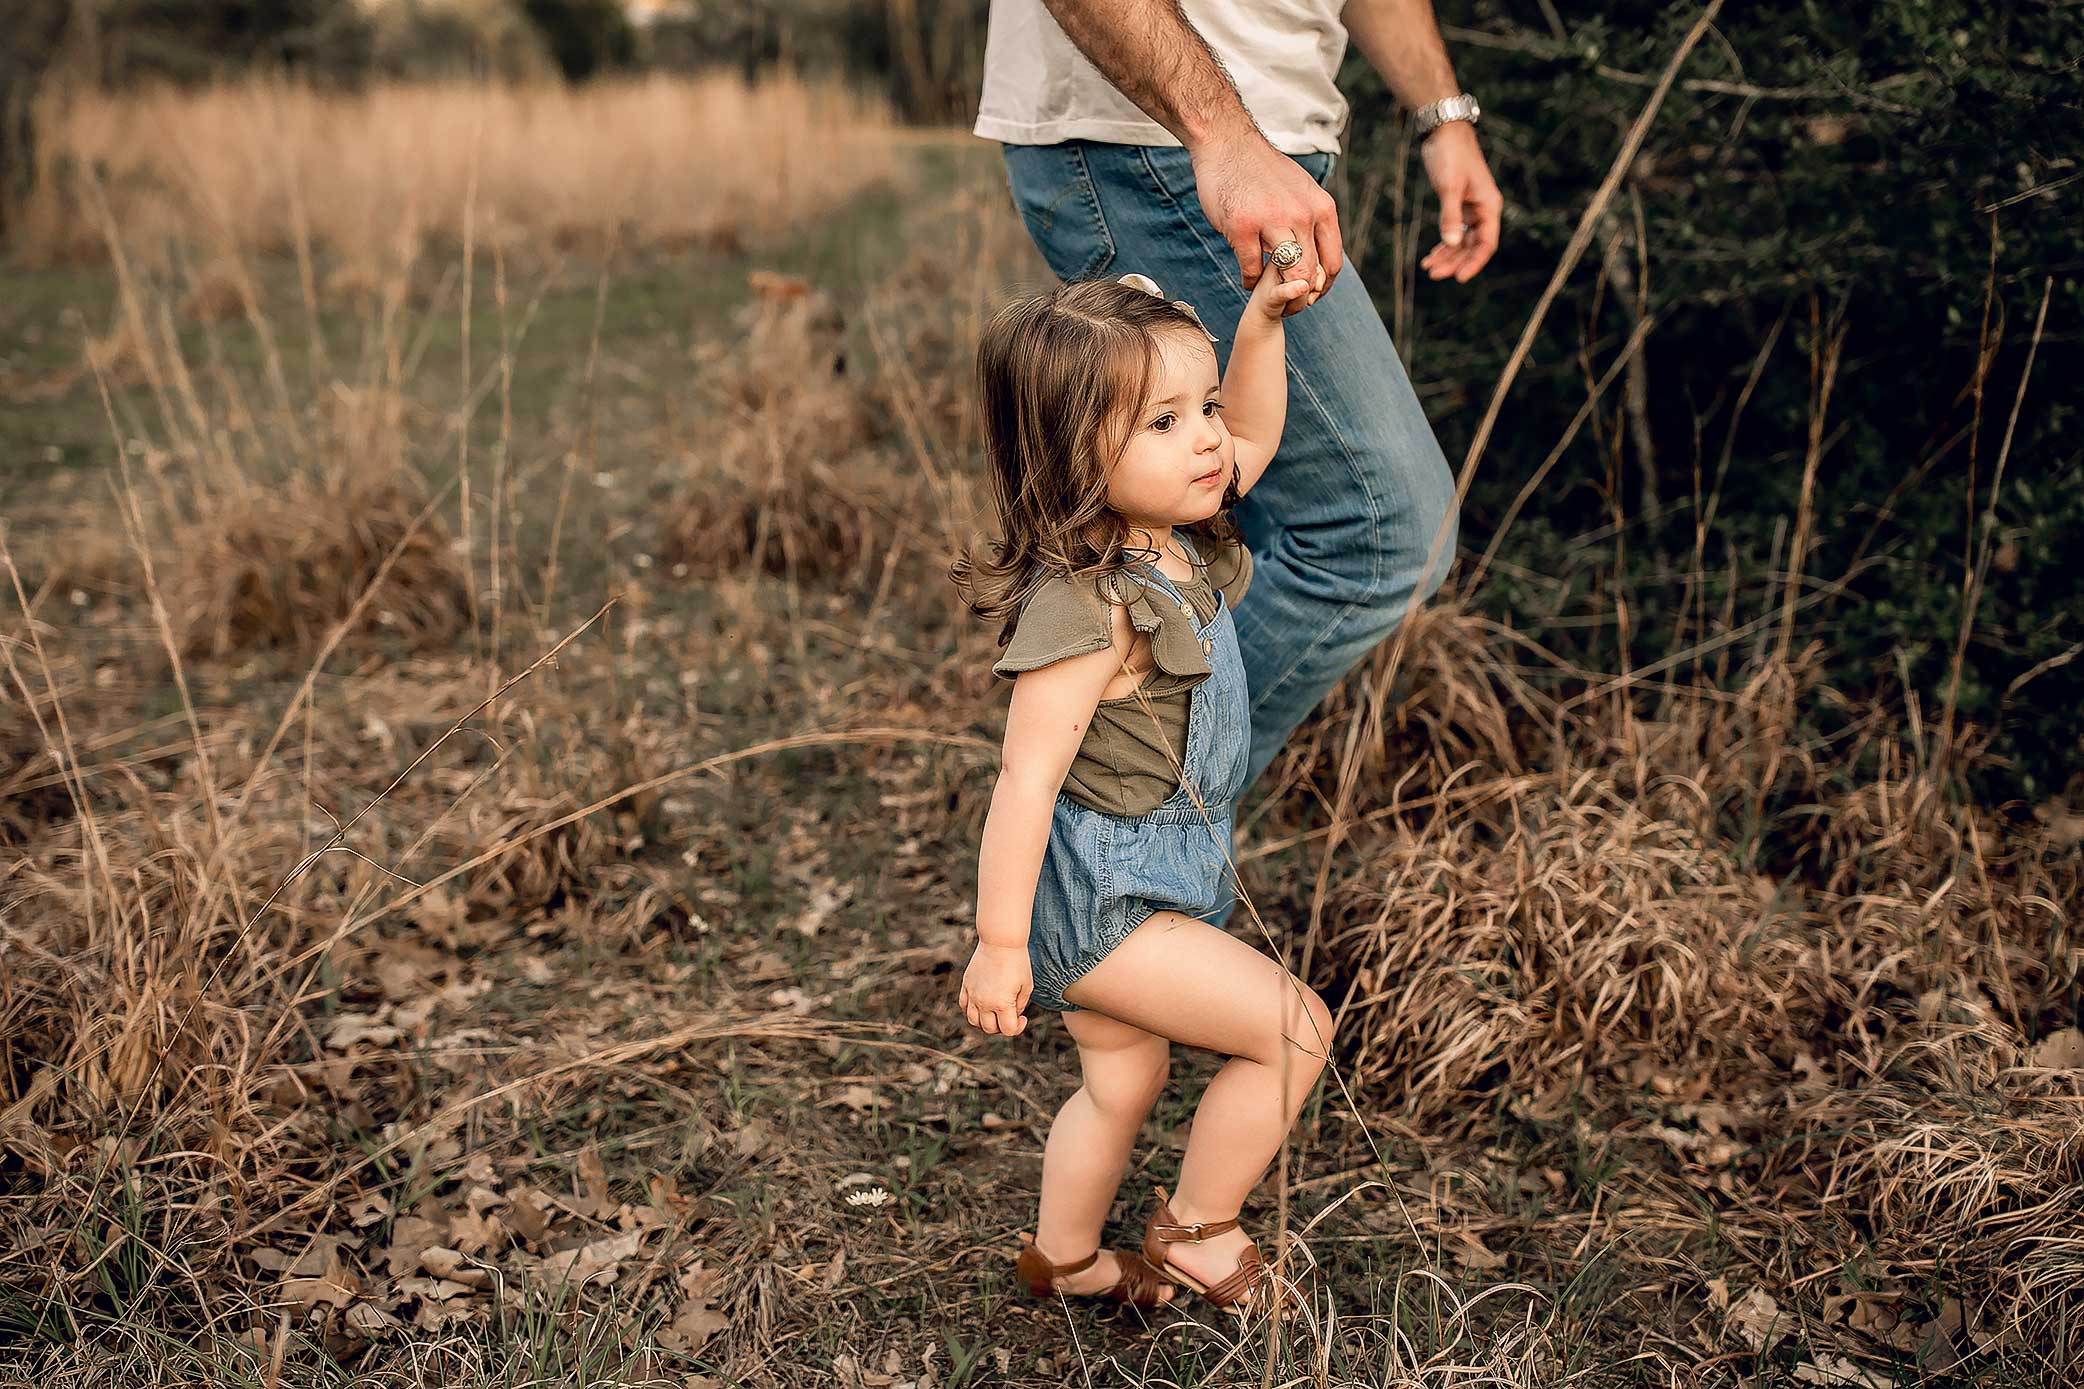 shelby-schiller-photography-sunset-family-pictures-spring-2019-44.jpg